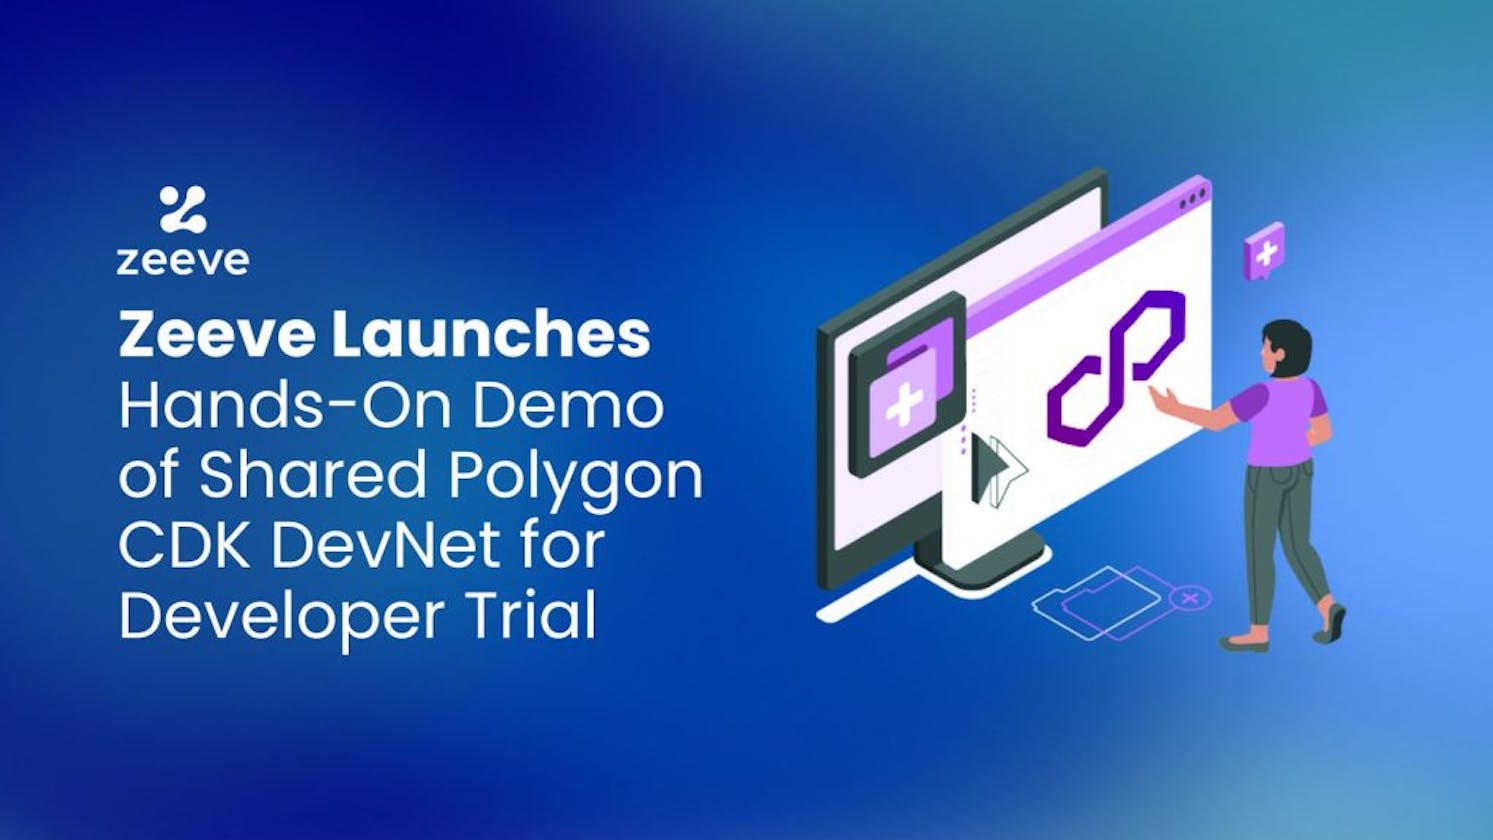 Zeeve Launches Hands-On Demo of Shared Polygon CDK DevNet for Developer Trial